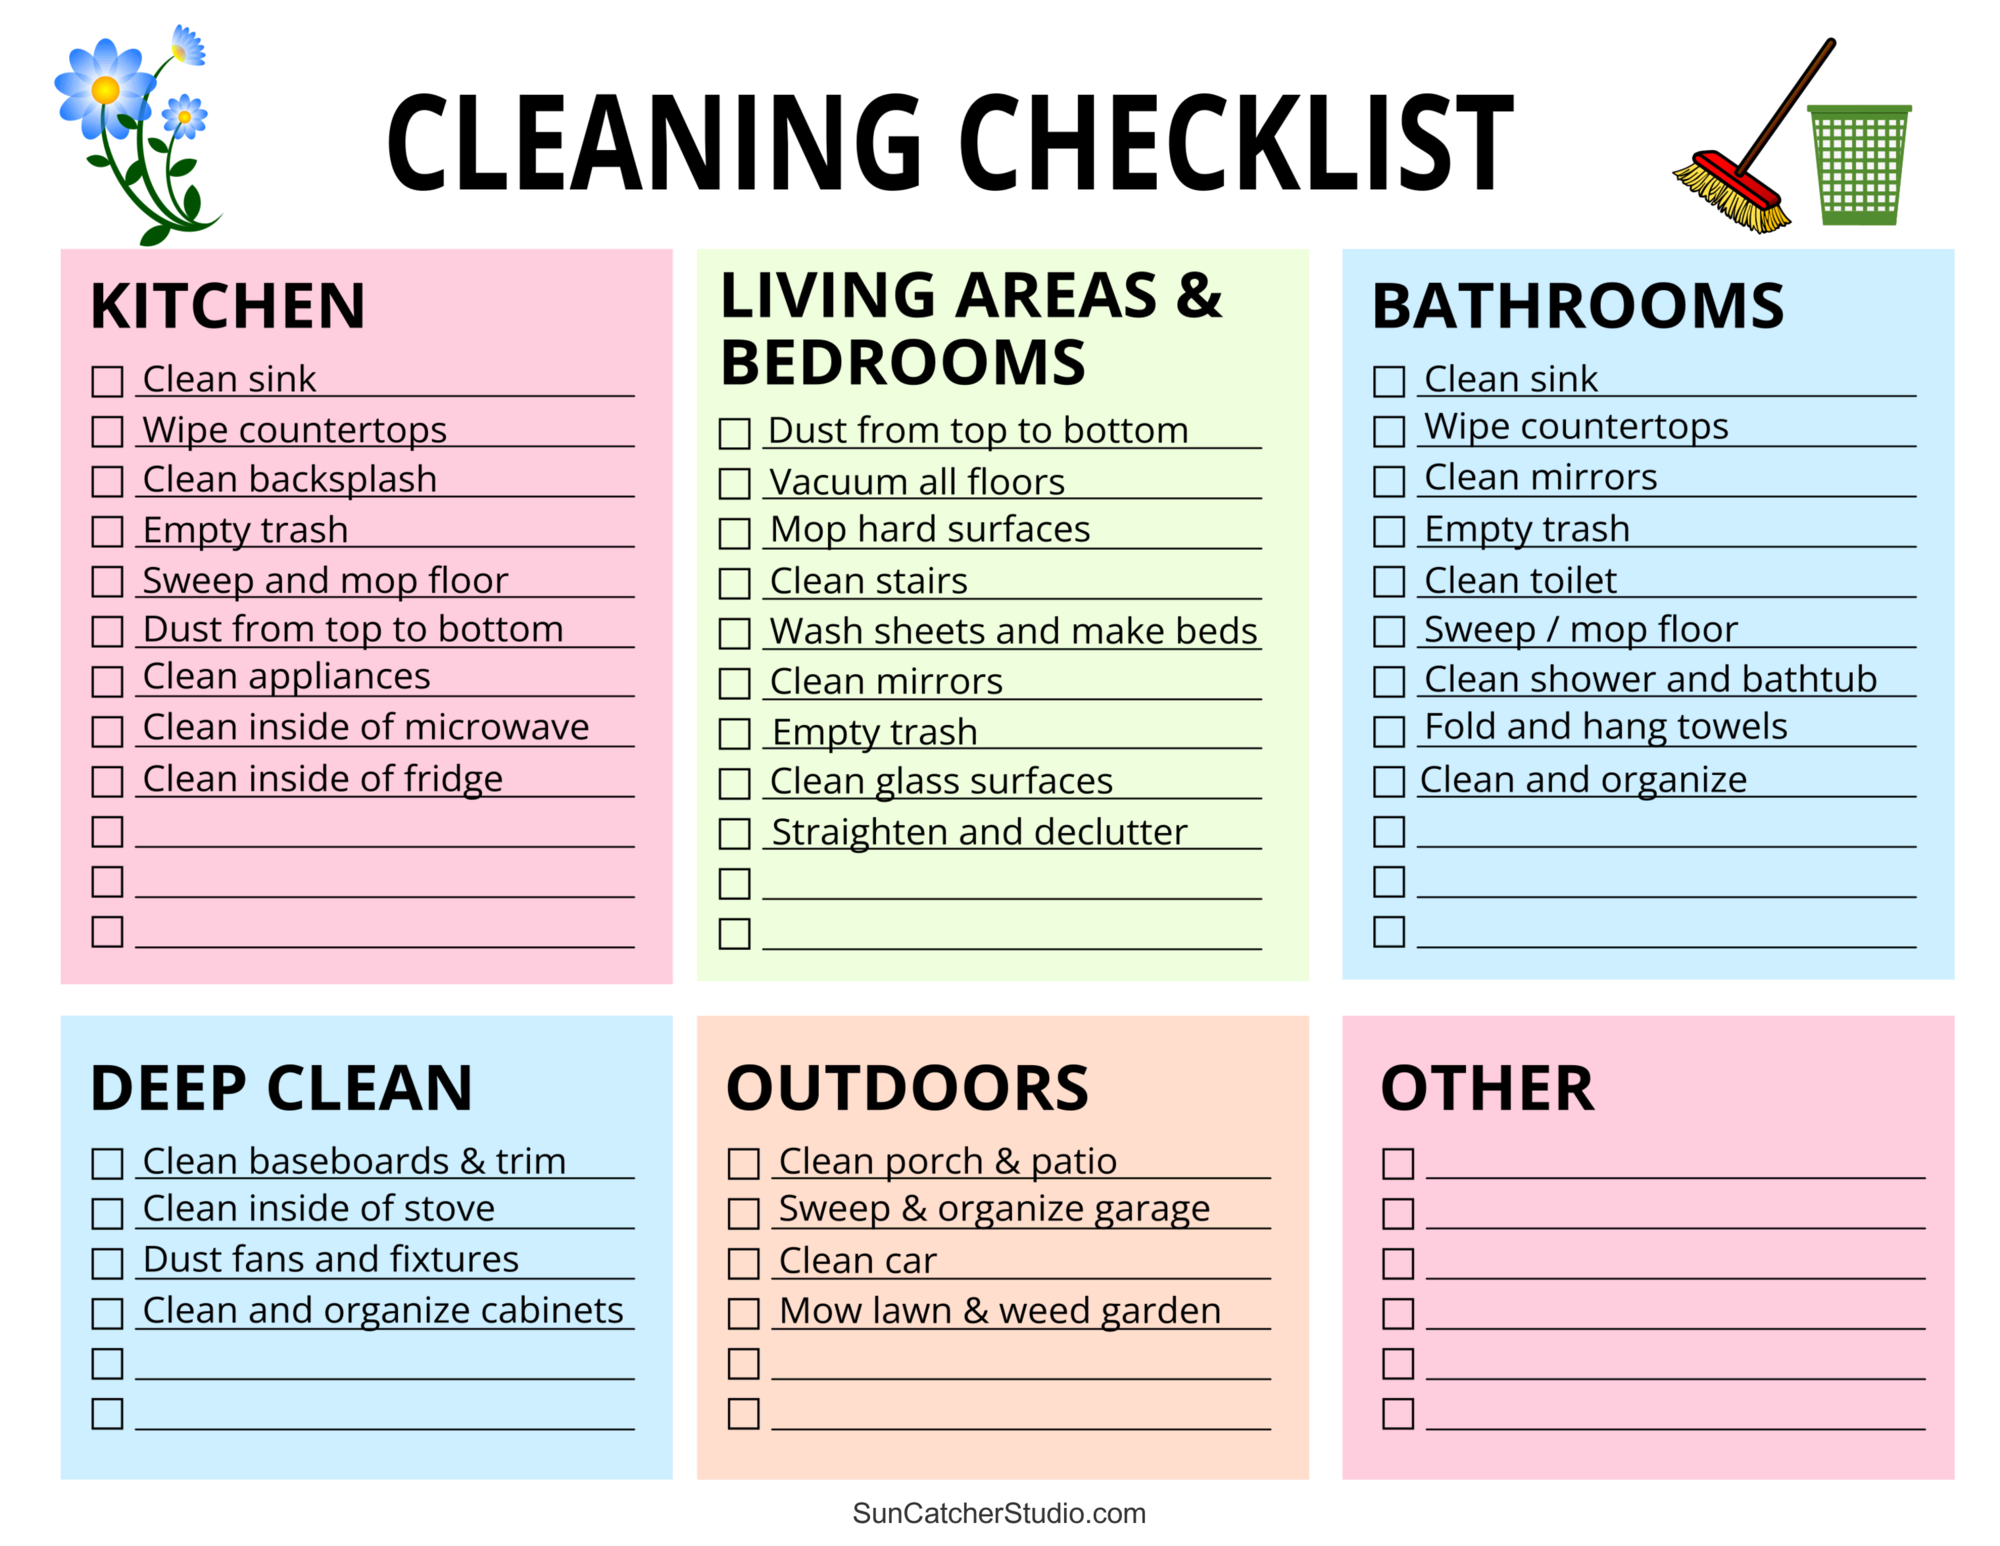 Cleaning Checklist By Room 010101 Fefefe 